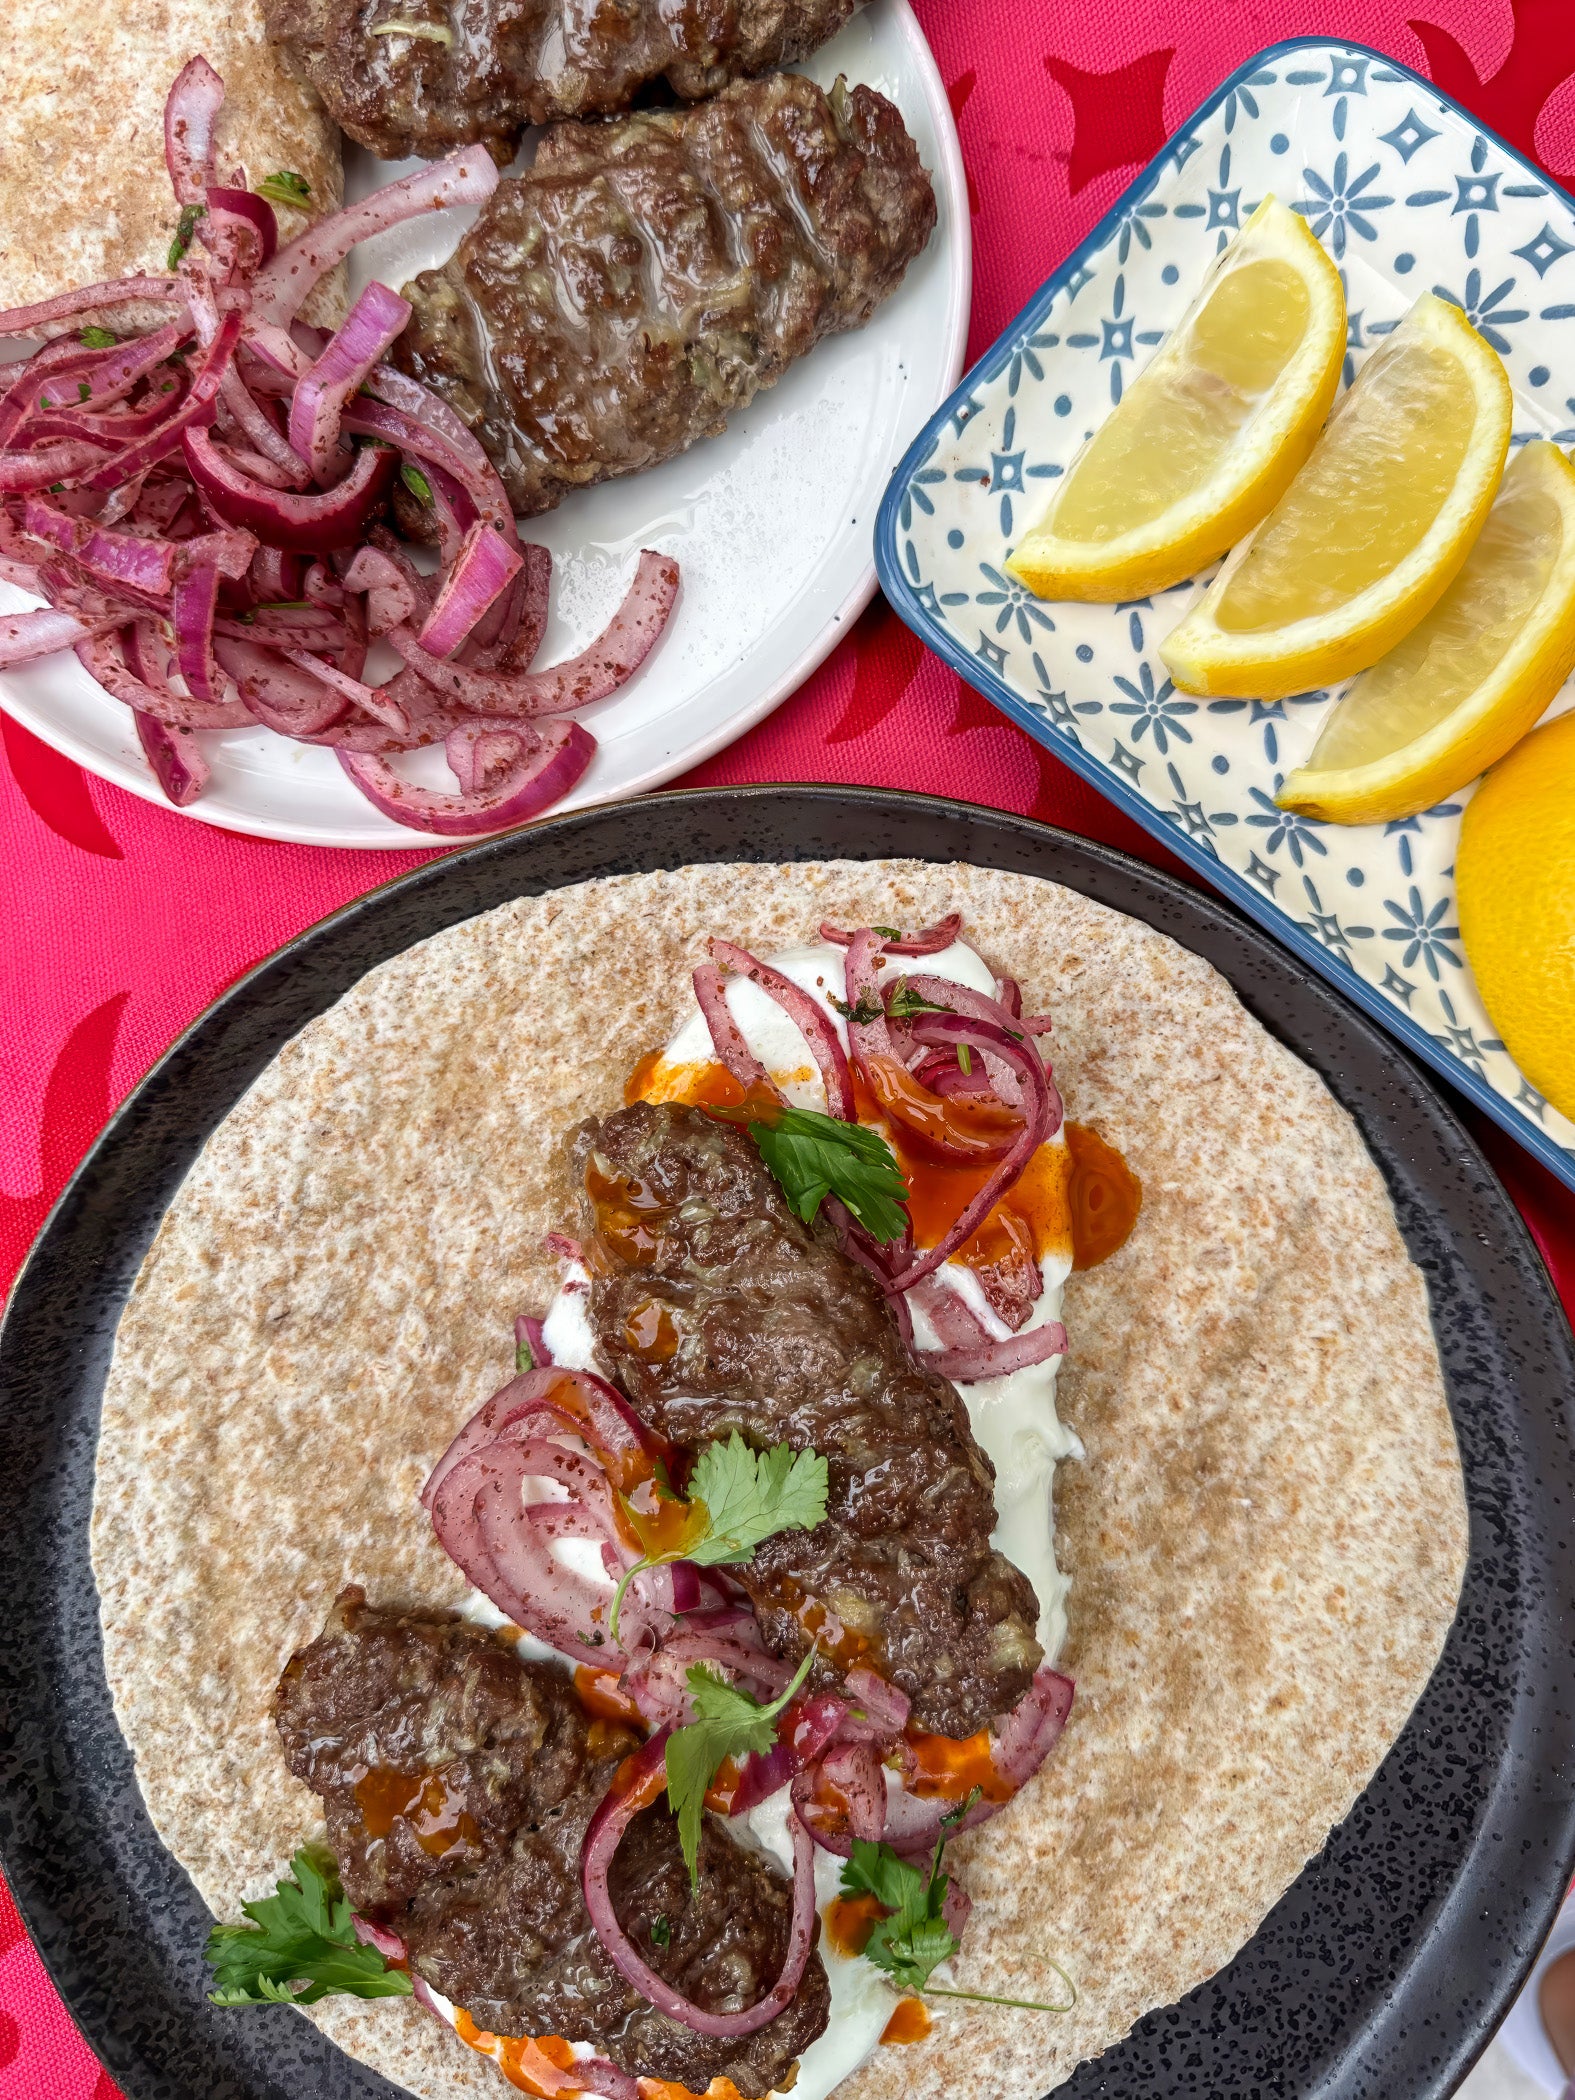 If you’re a meat fiend, these kebabs are for you